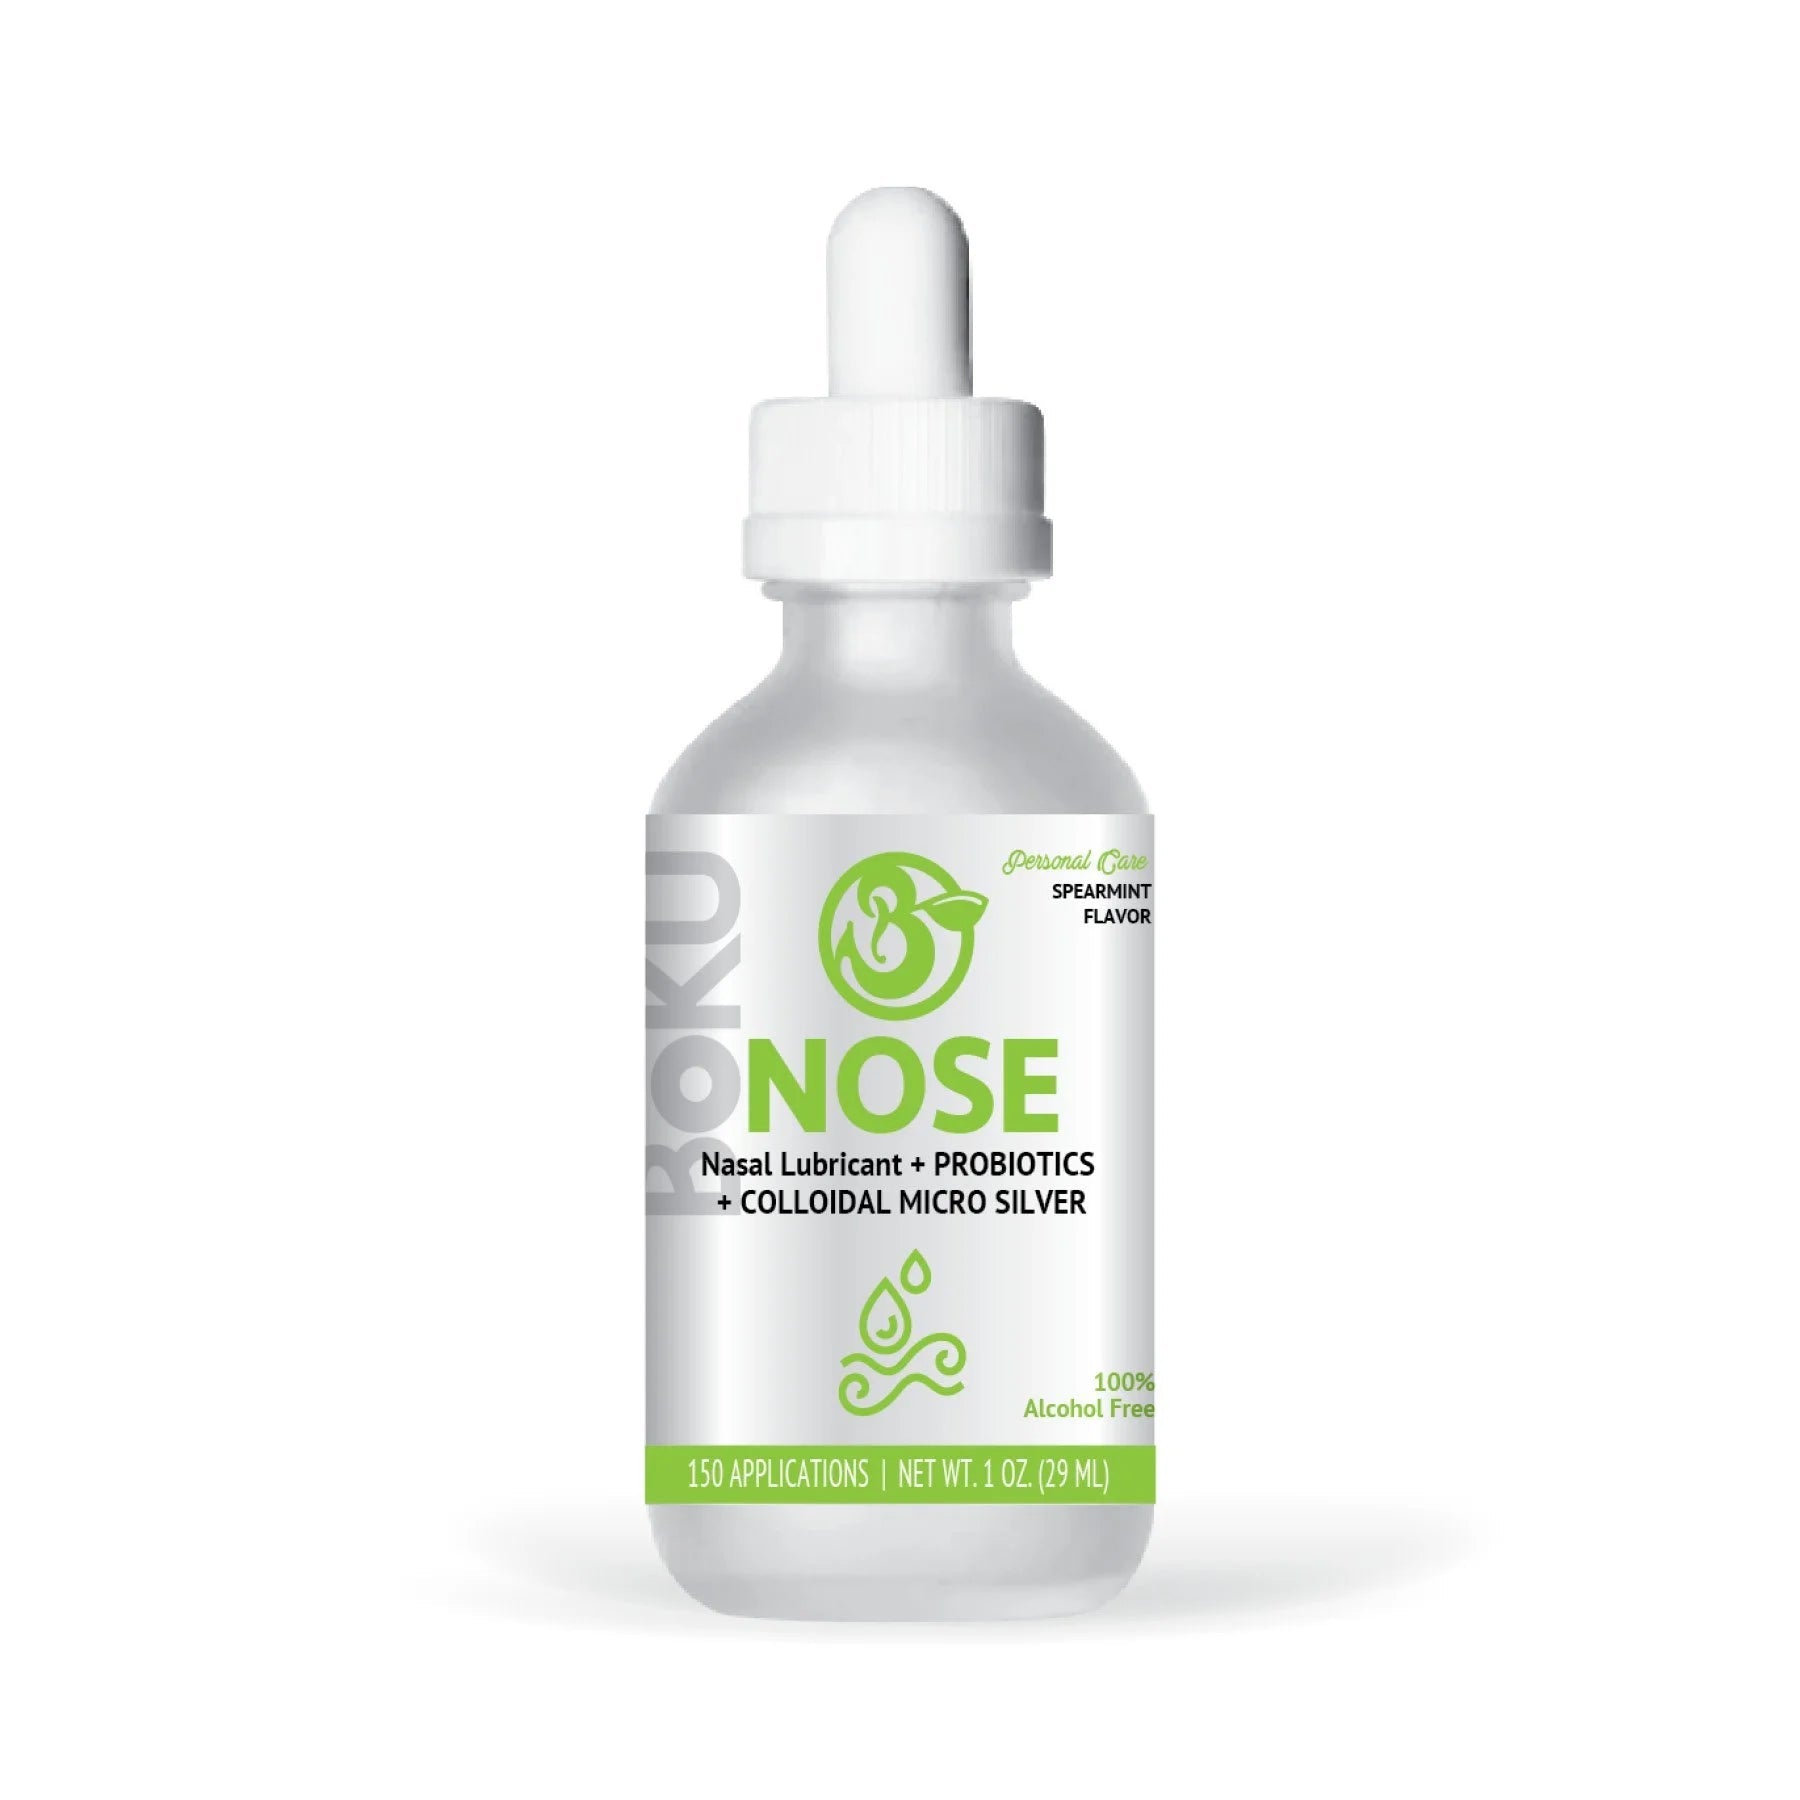 Boku Nose ayurvedic nasal lubricant with probiotics and colloidal micro silver